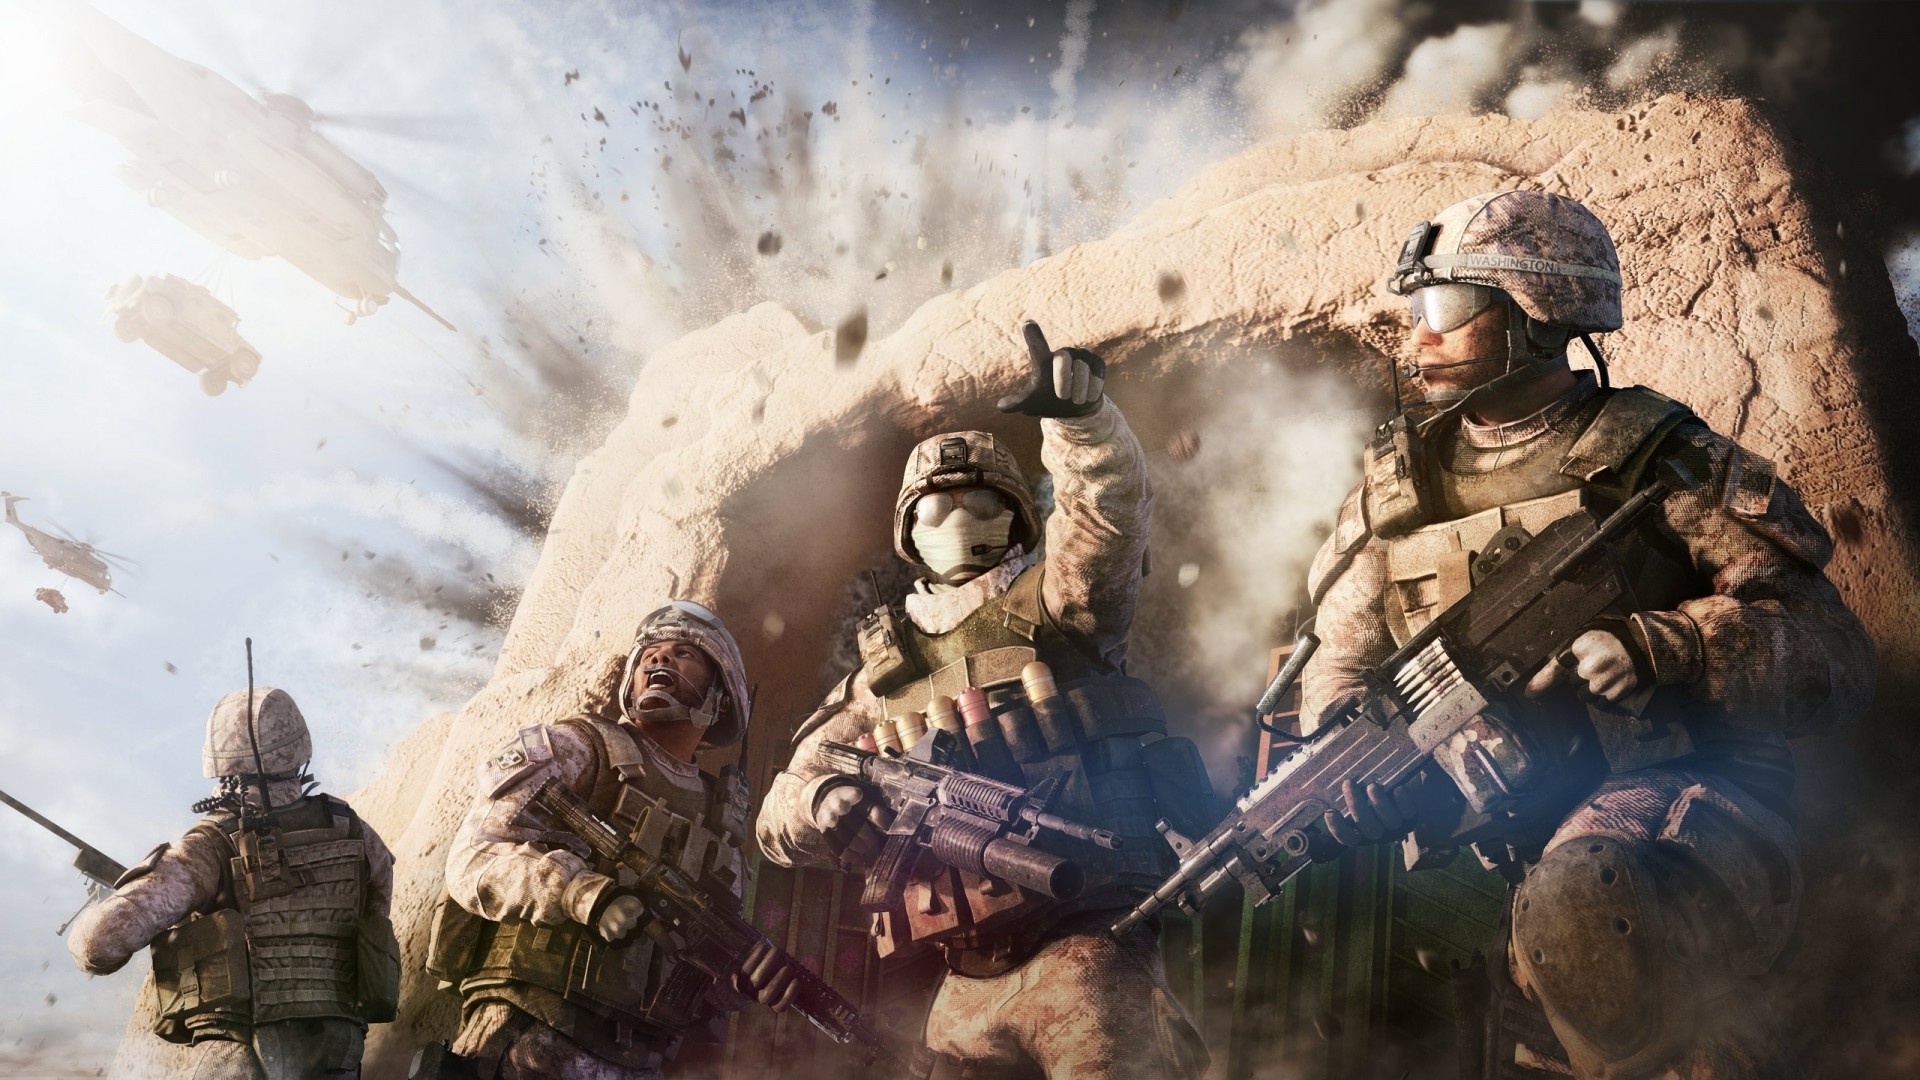 Cool Military Backgrounds (61+ pictures)